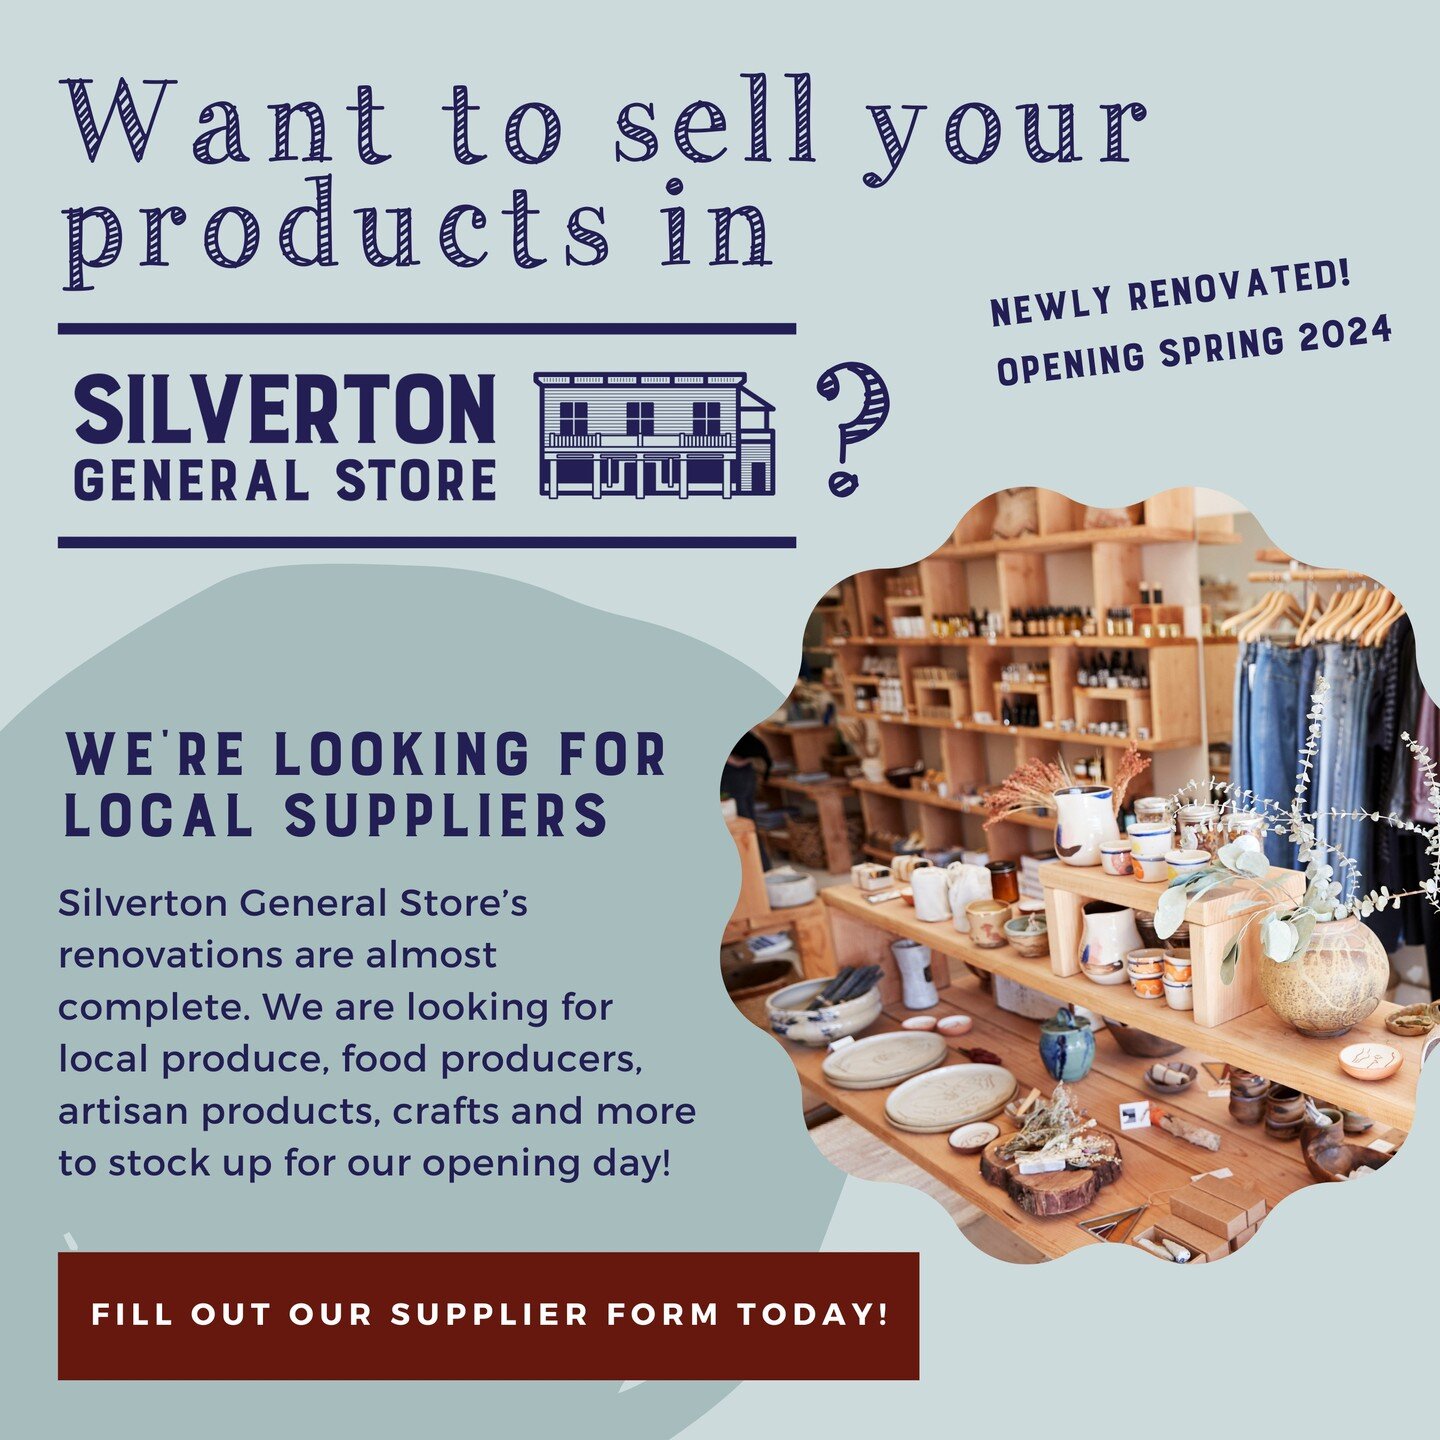 Are you a local artist, crafter or food producer? 

Silverton General Store is looking for local suppliers in preparation of opening day. Our newly renovated, historic building will be home to a wide variety of goods including healthy groceries, natu